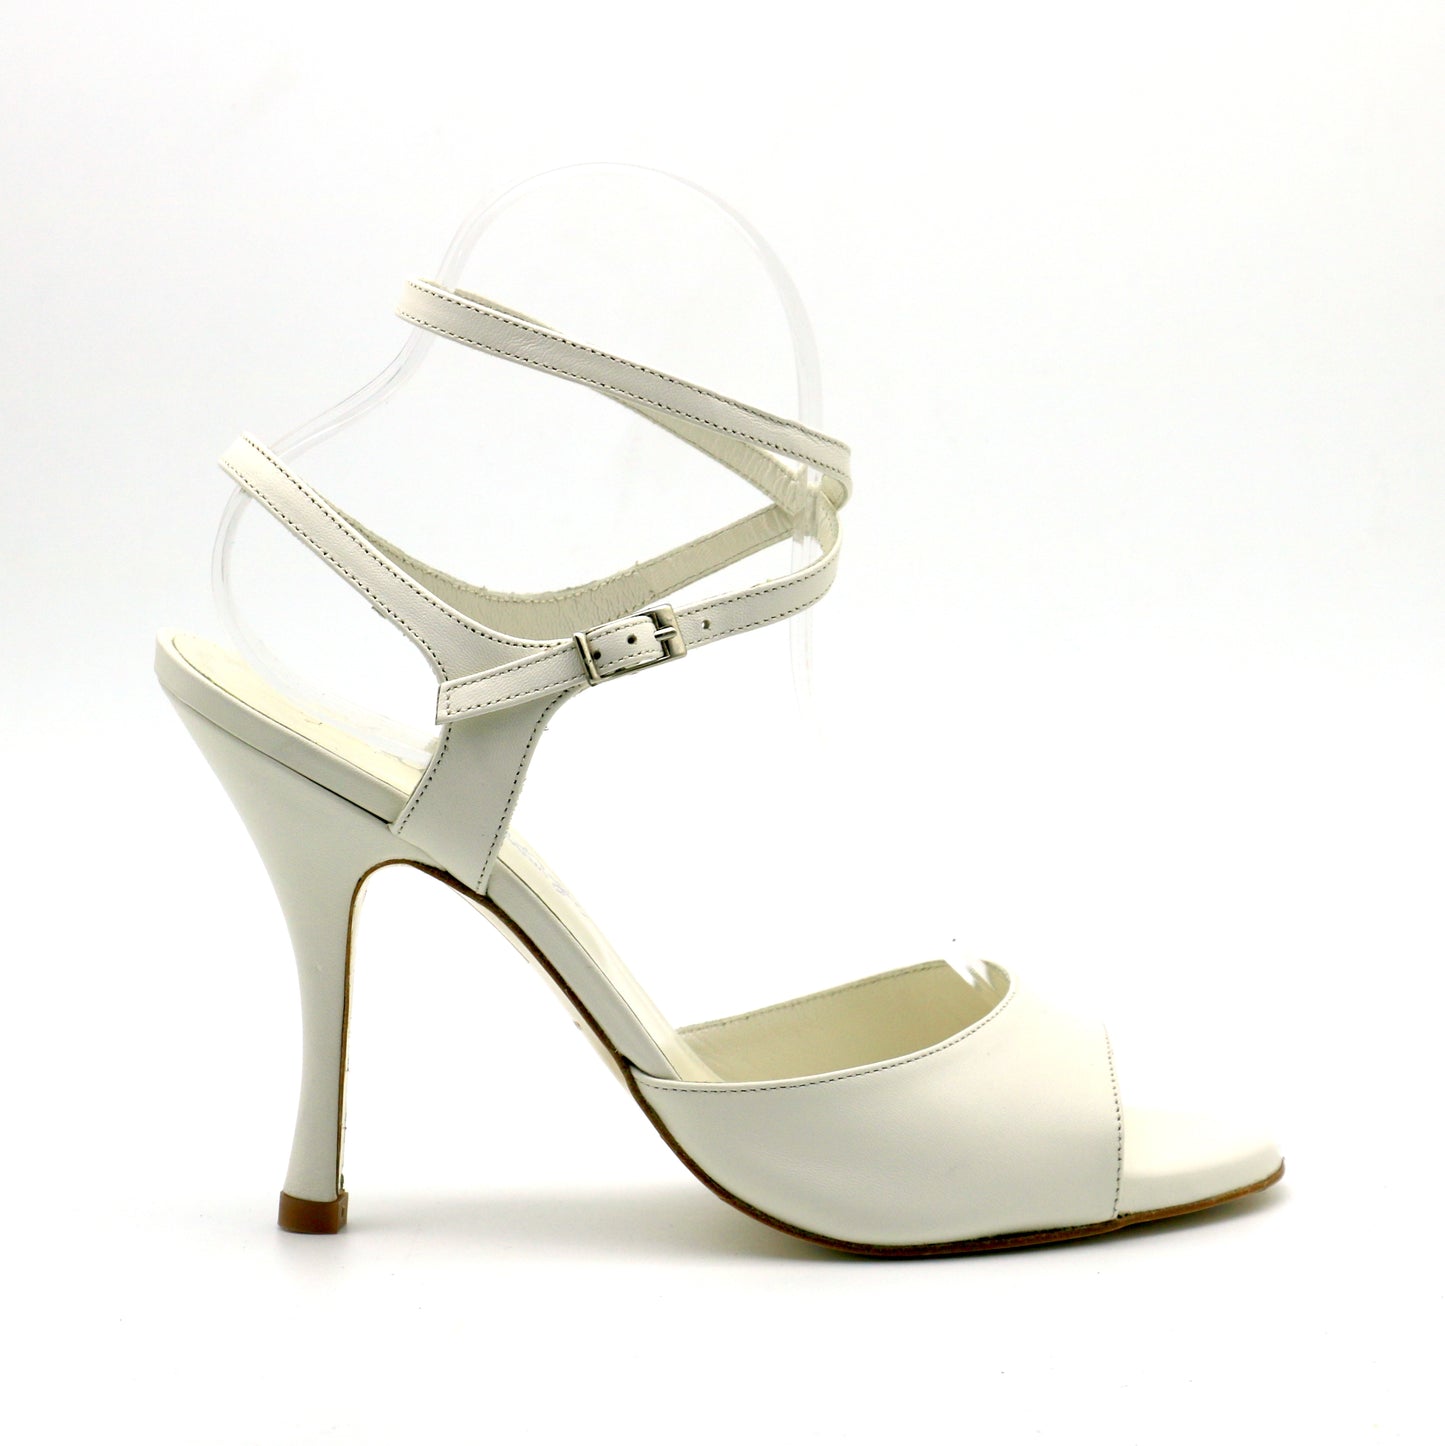 Sentimental off-white smooth leather 9cm heels